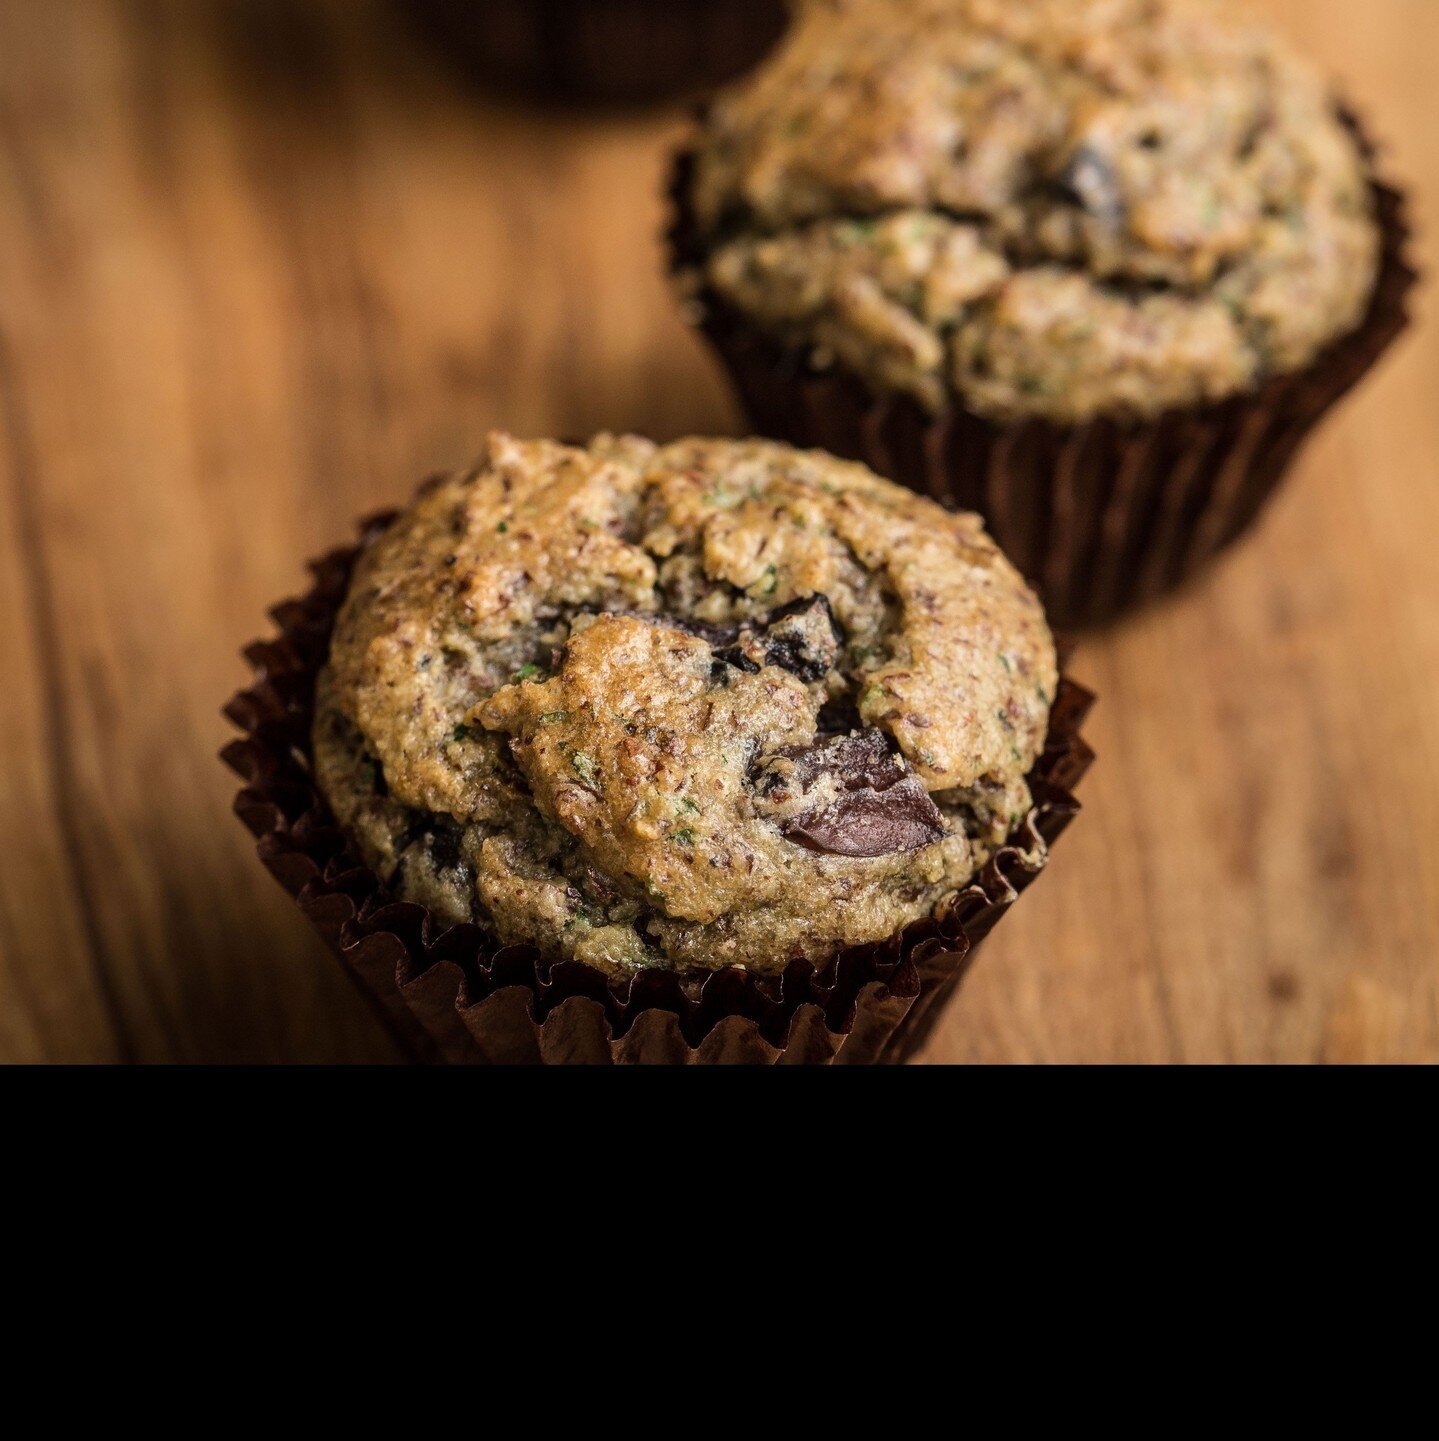 These Gluten-Free Blueberry Mini Muffins are easy on the constitution. Many folks can&rsquo;t tolerate gluten, especially as they get older. Here I&rsquo;ve canoodled with almonds, eggs, blueberries, vanilla, and honey to create a pick-me-up in every